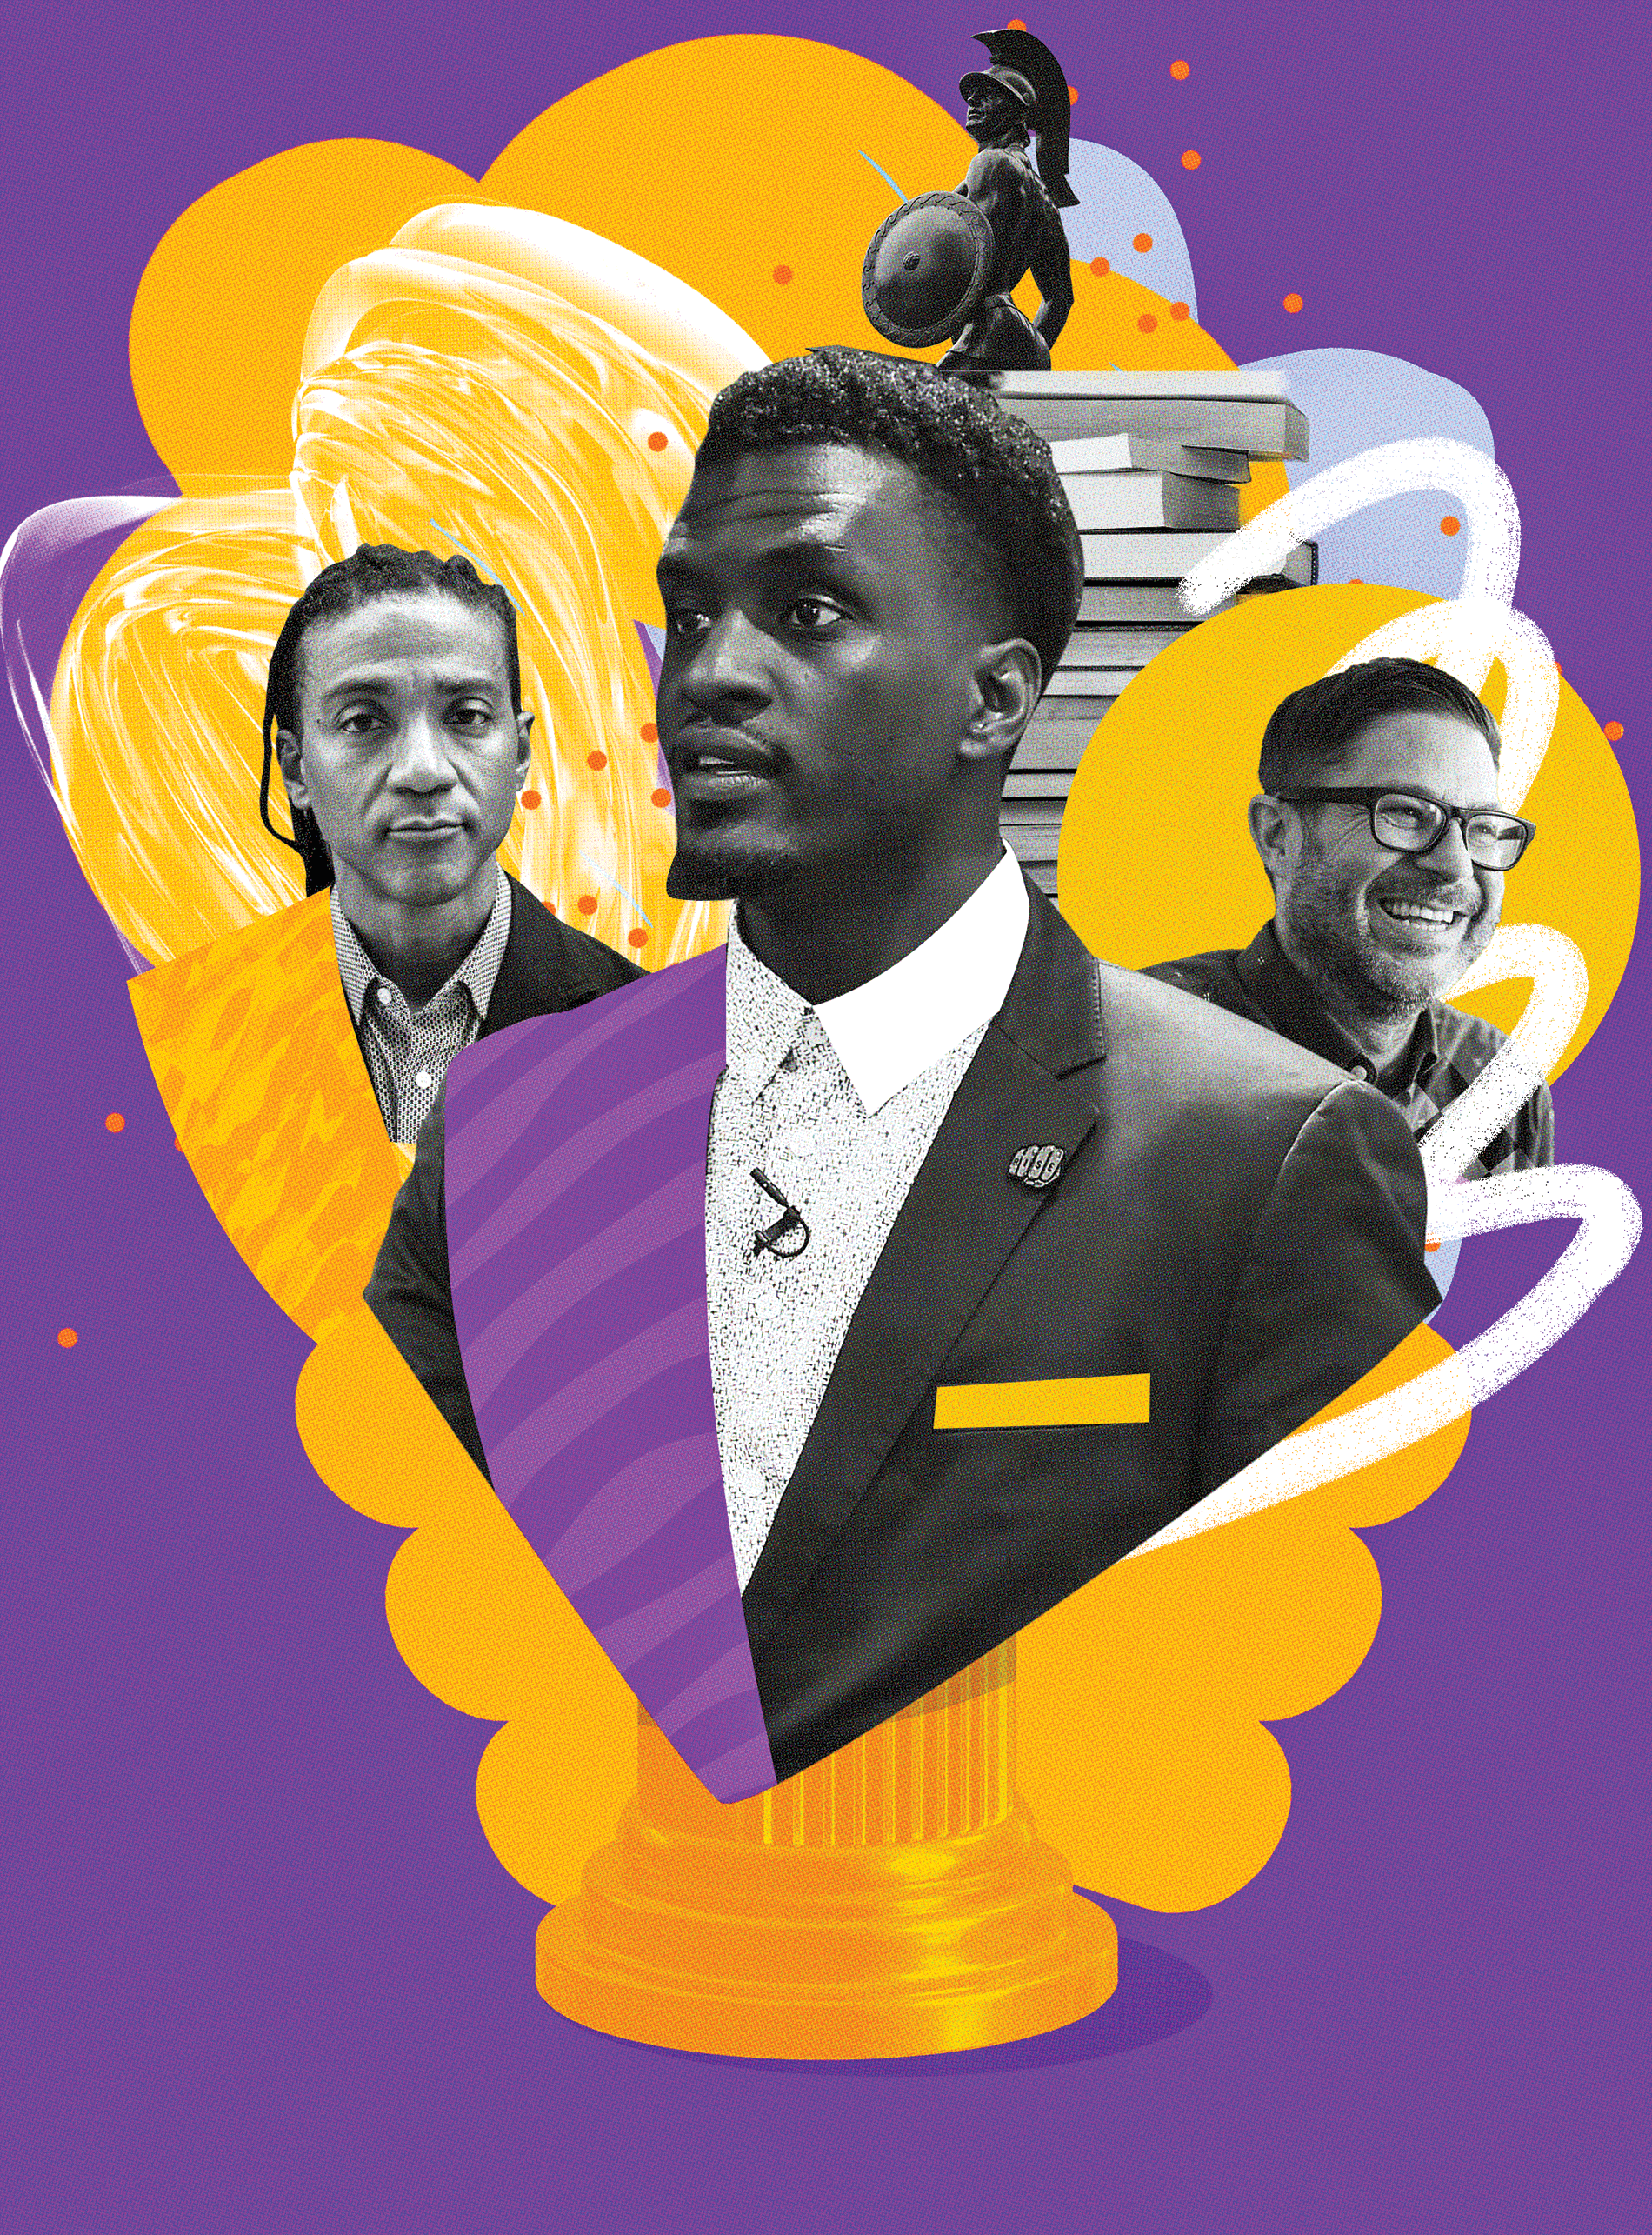 Illustration of Edwin Hill, Taj Frazier, and Josh Kun with images of books and Tommy Trojan in the backdrop over a purple background.